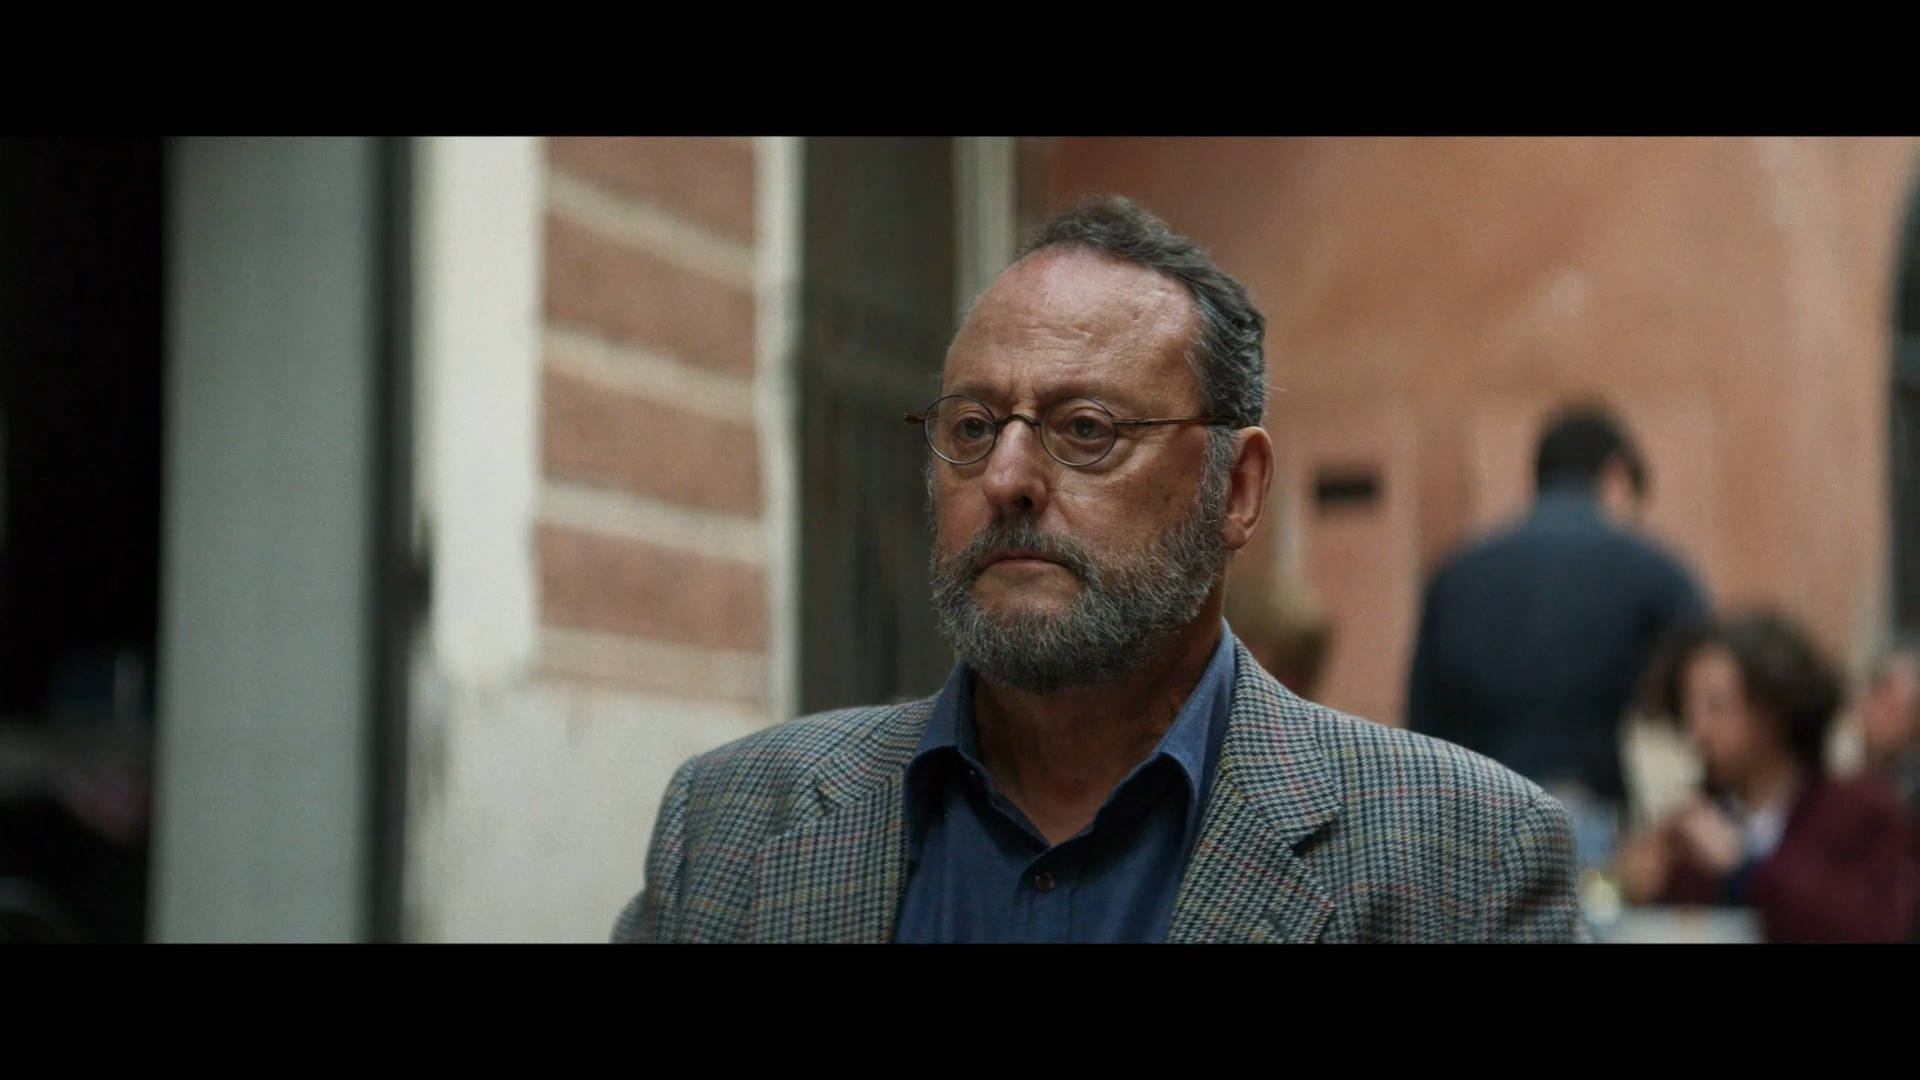 Renowned French actor Jean Reno in a candid still from one of his European movies Wallpaper